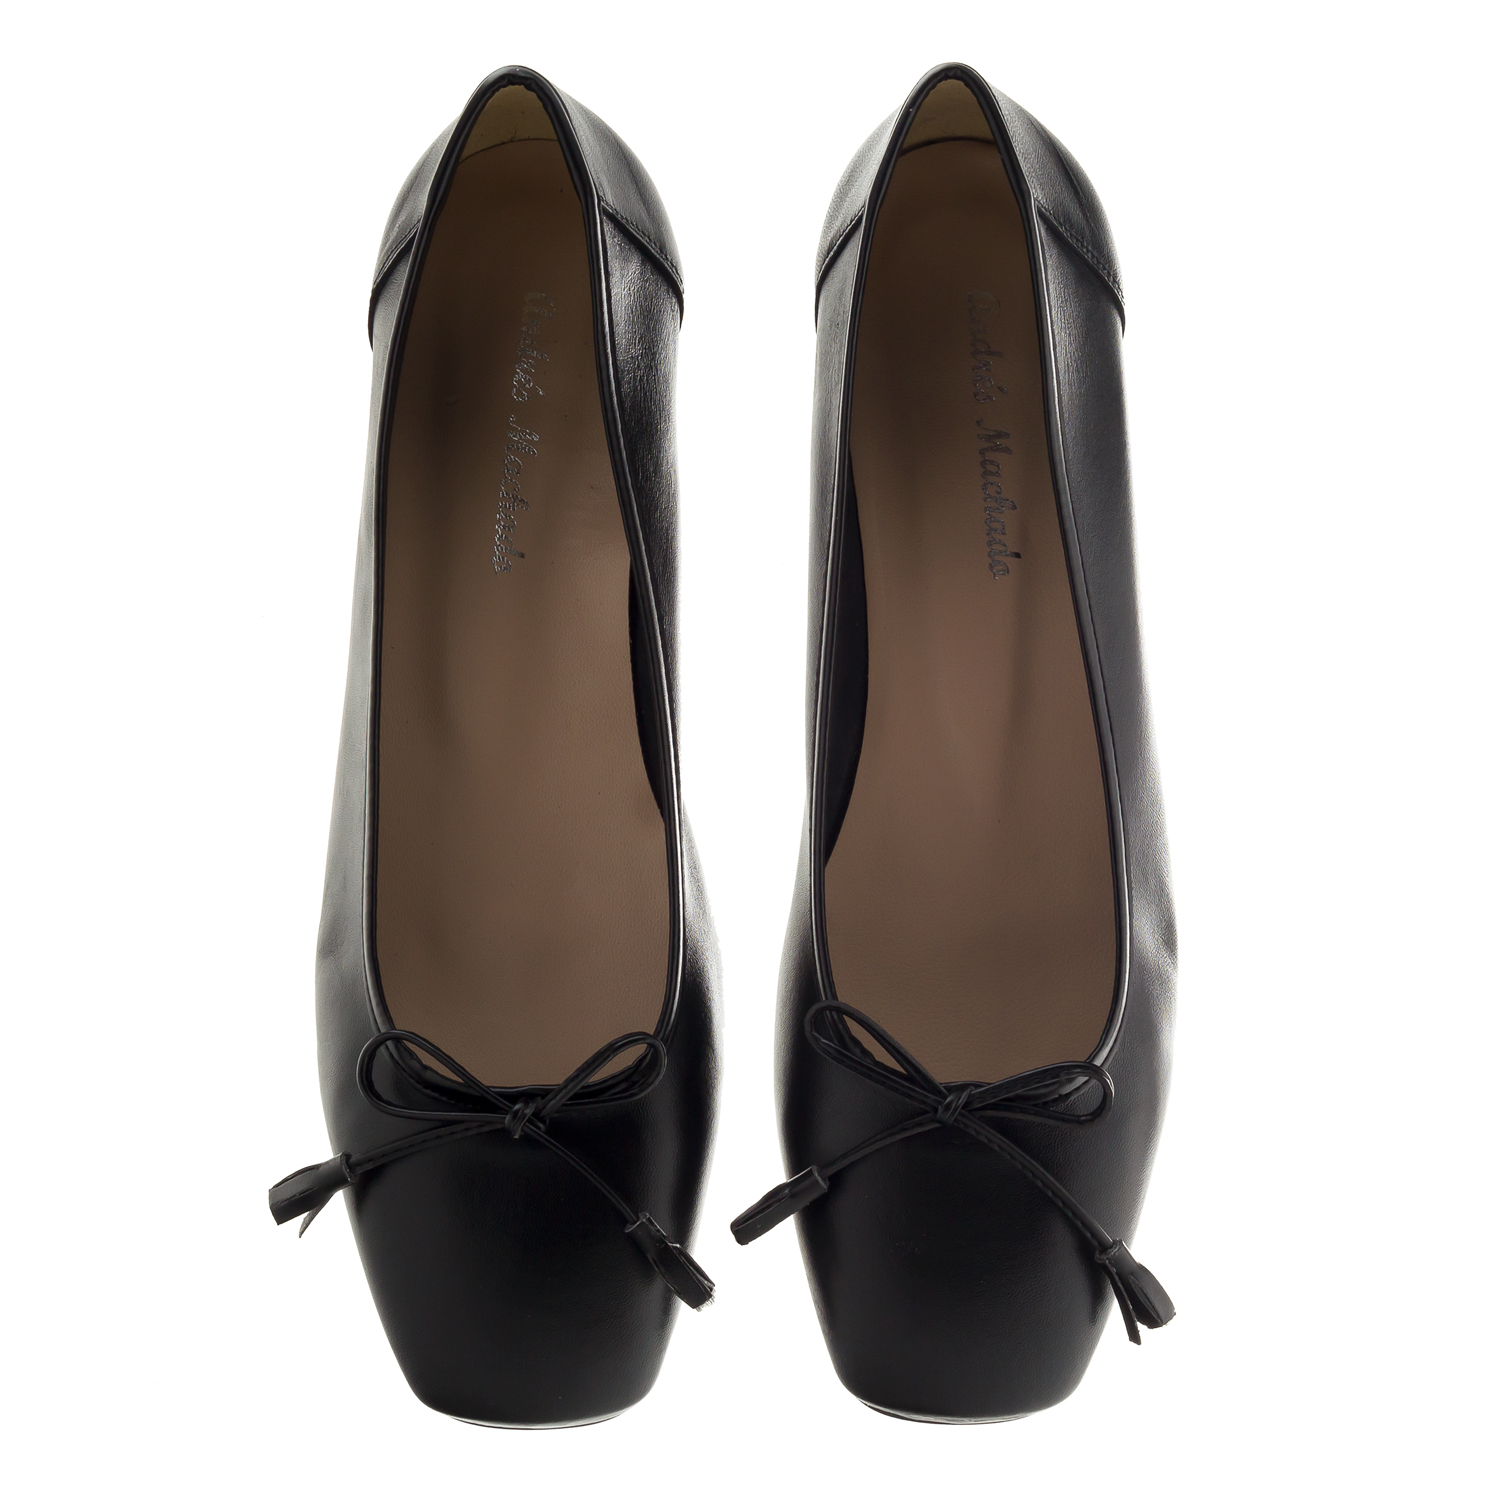 Bow Ballet Flats in Black Leather 